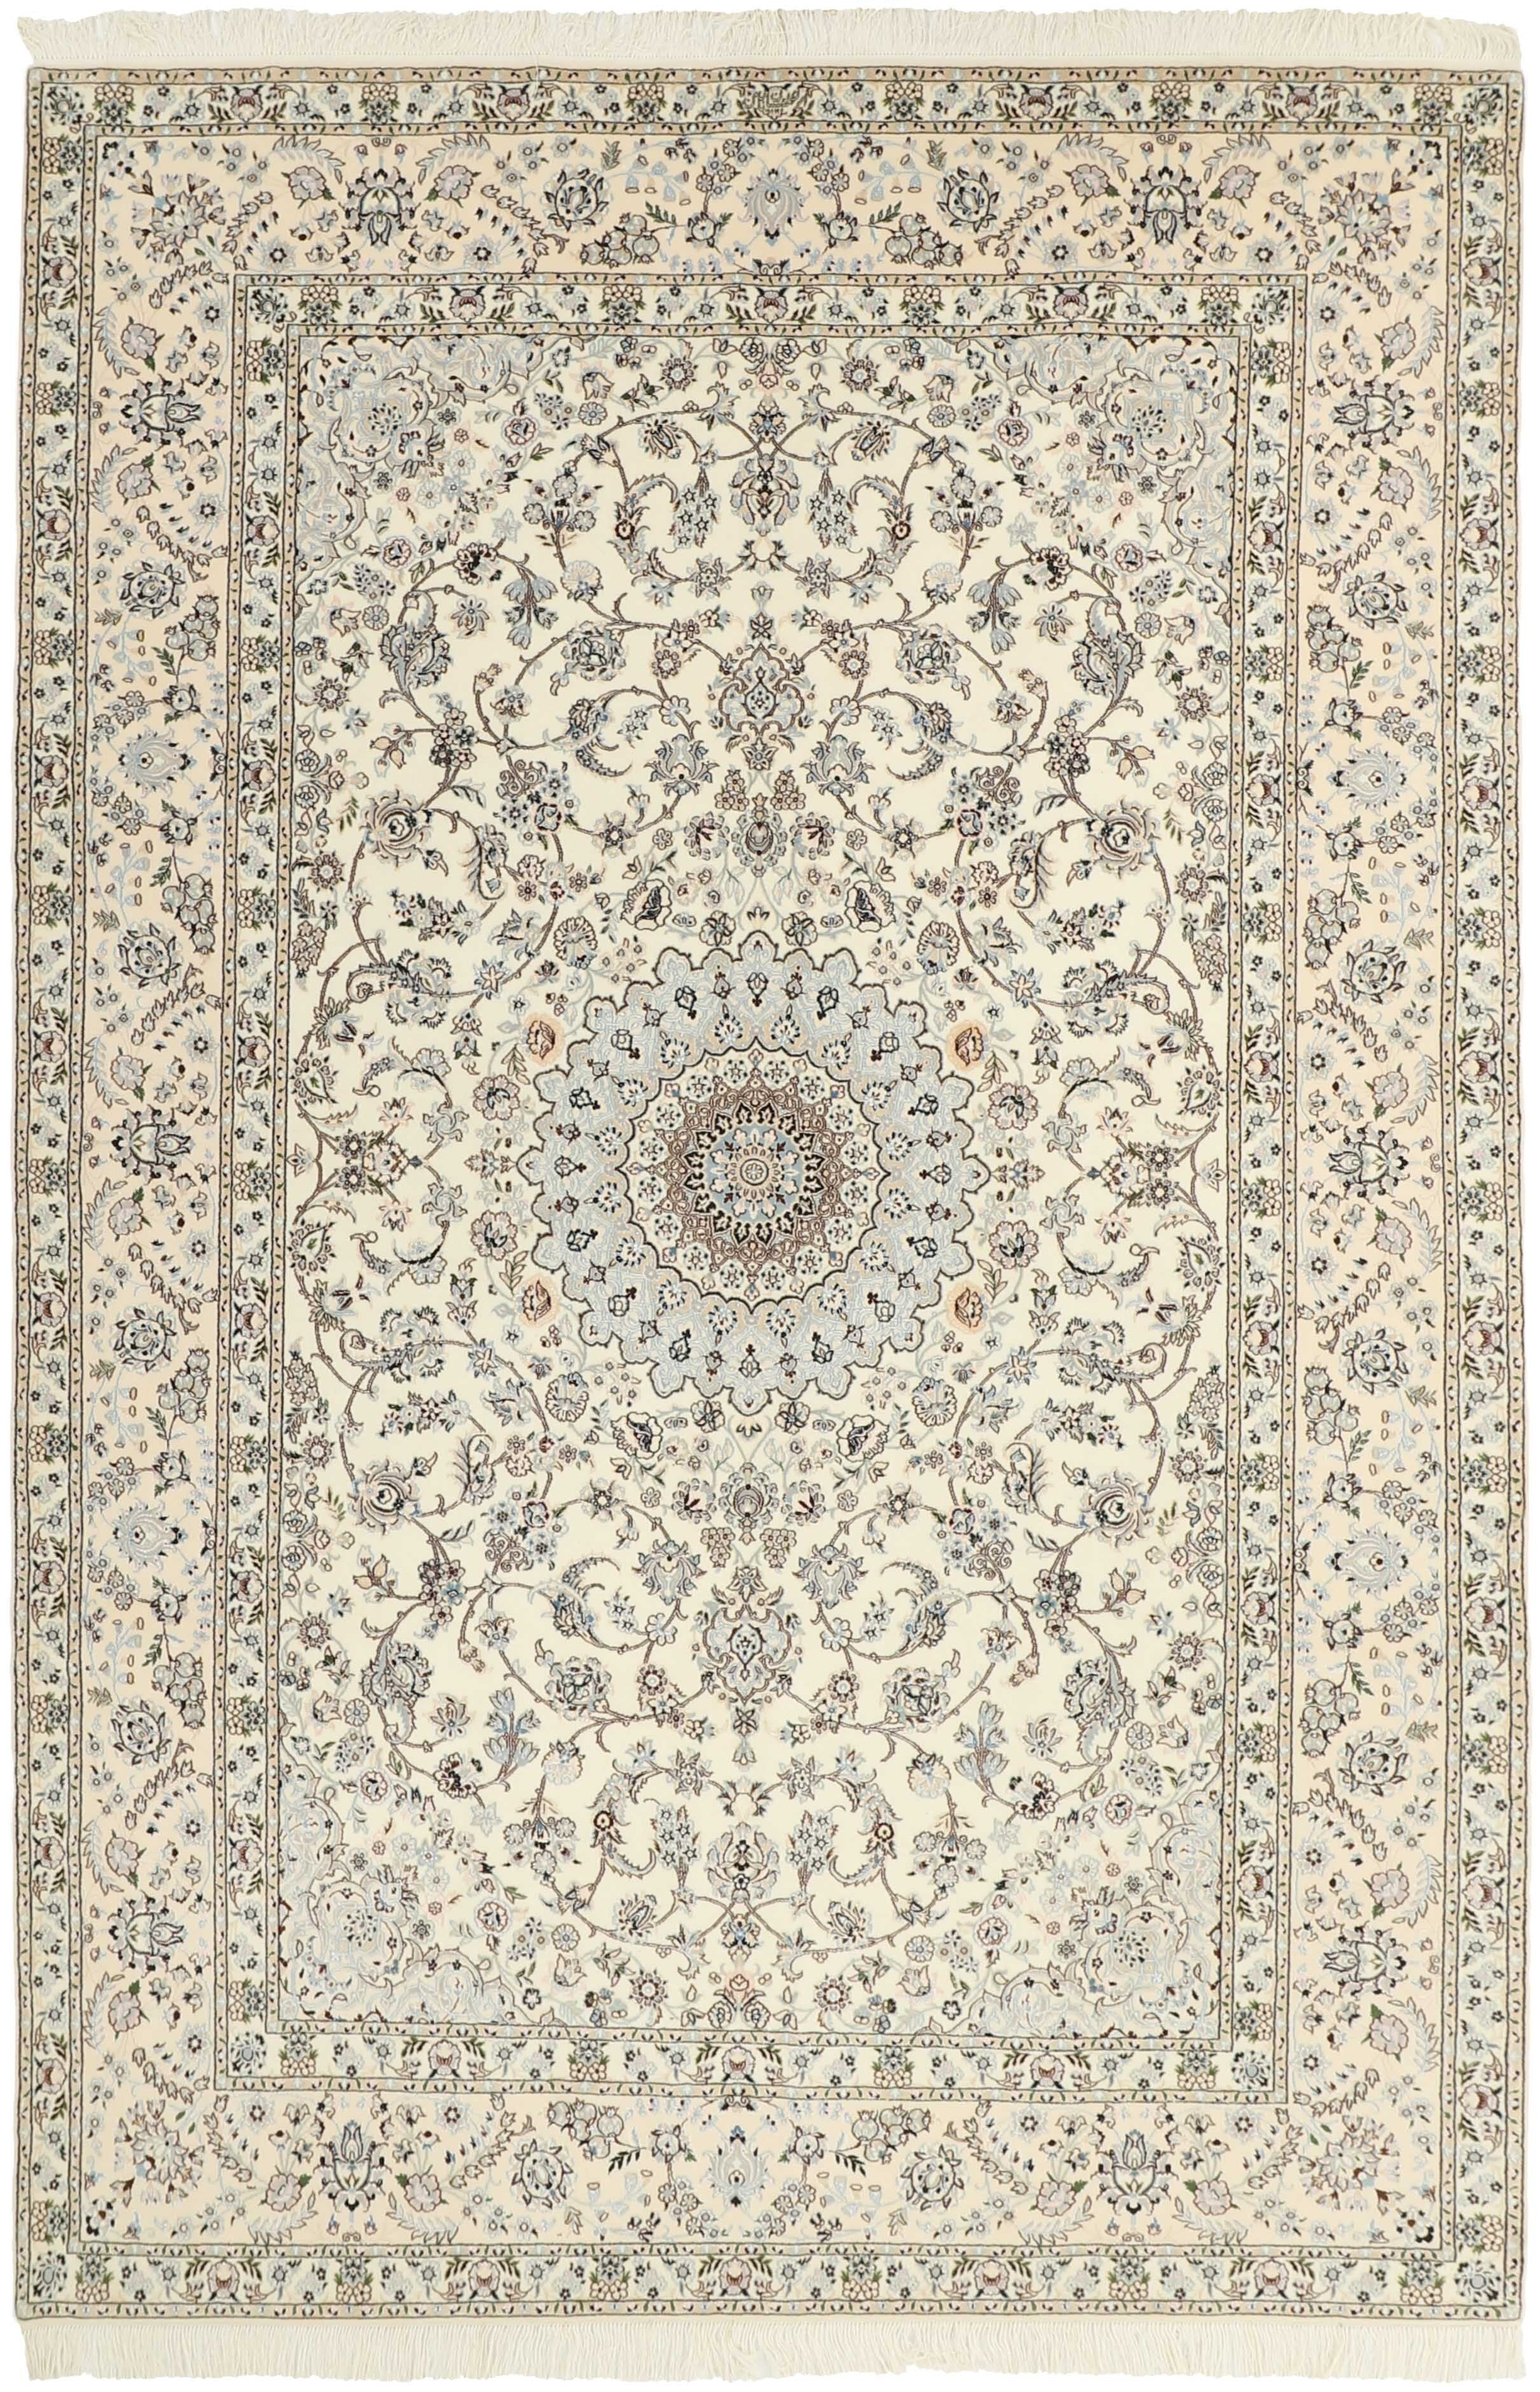 Authentic oriental rug with traditional floral design in cream, red and blue